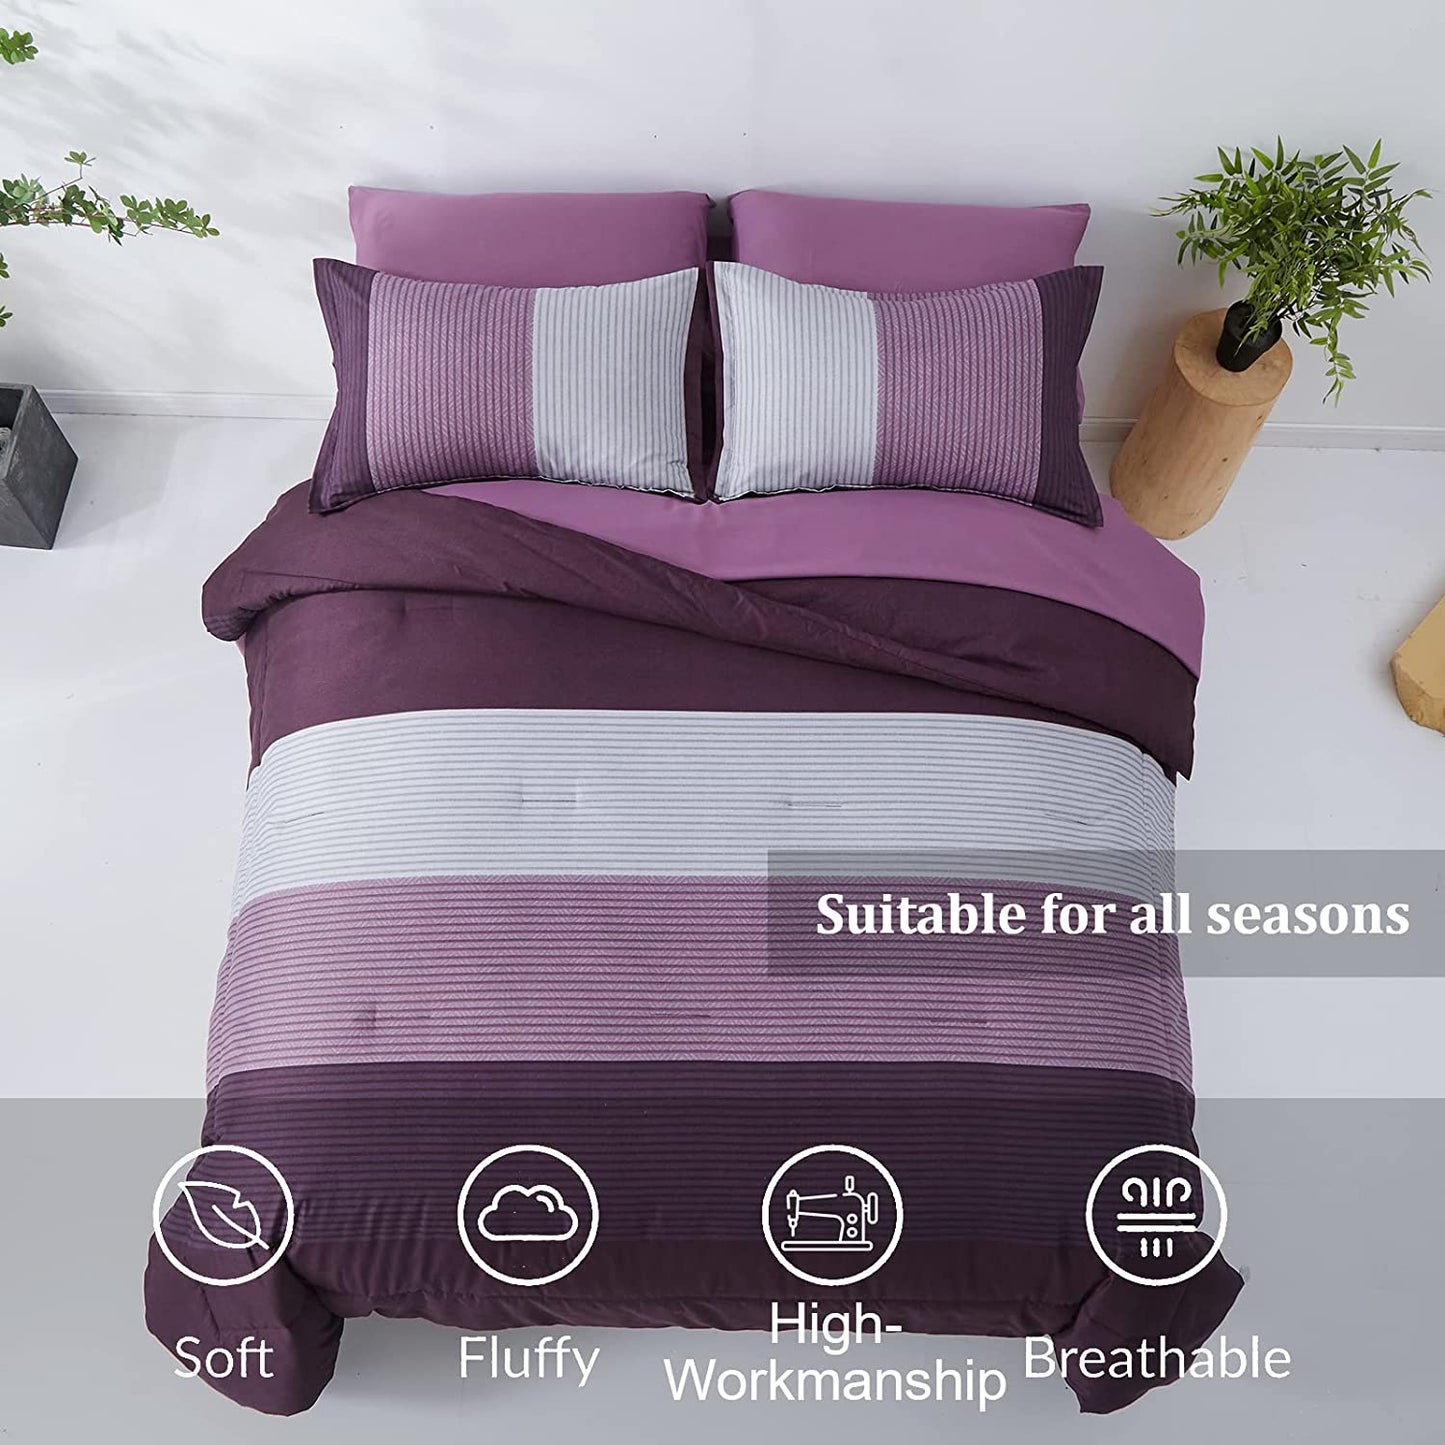 Purple Stripe Queen Comforter Set 7 Pieces Stripe Comforter Sets with Comforter, Pillowshams, Flat Sheet, Fitted Sheet and Pillowcases